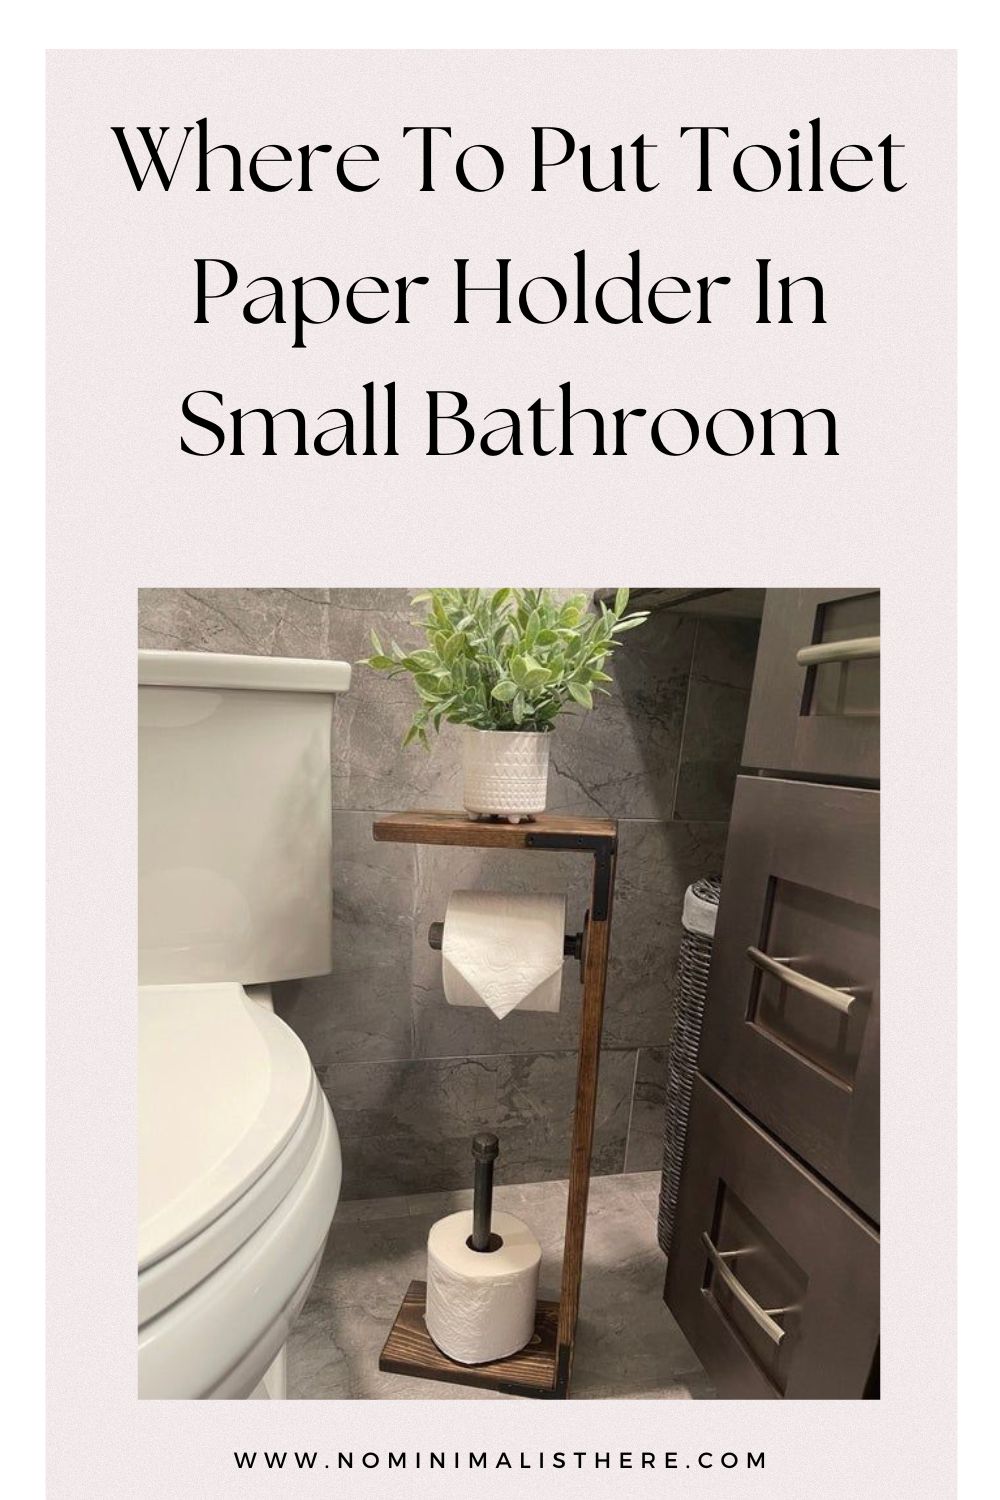 pinterest image for an article about   Where To Put Toilet Paper Holder In Small Bathroom